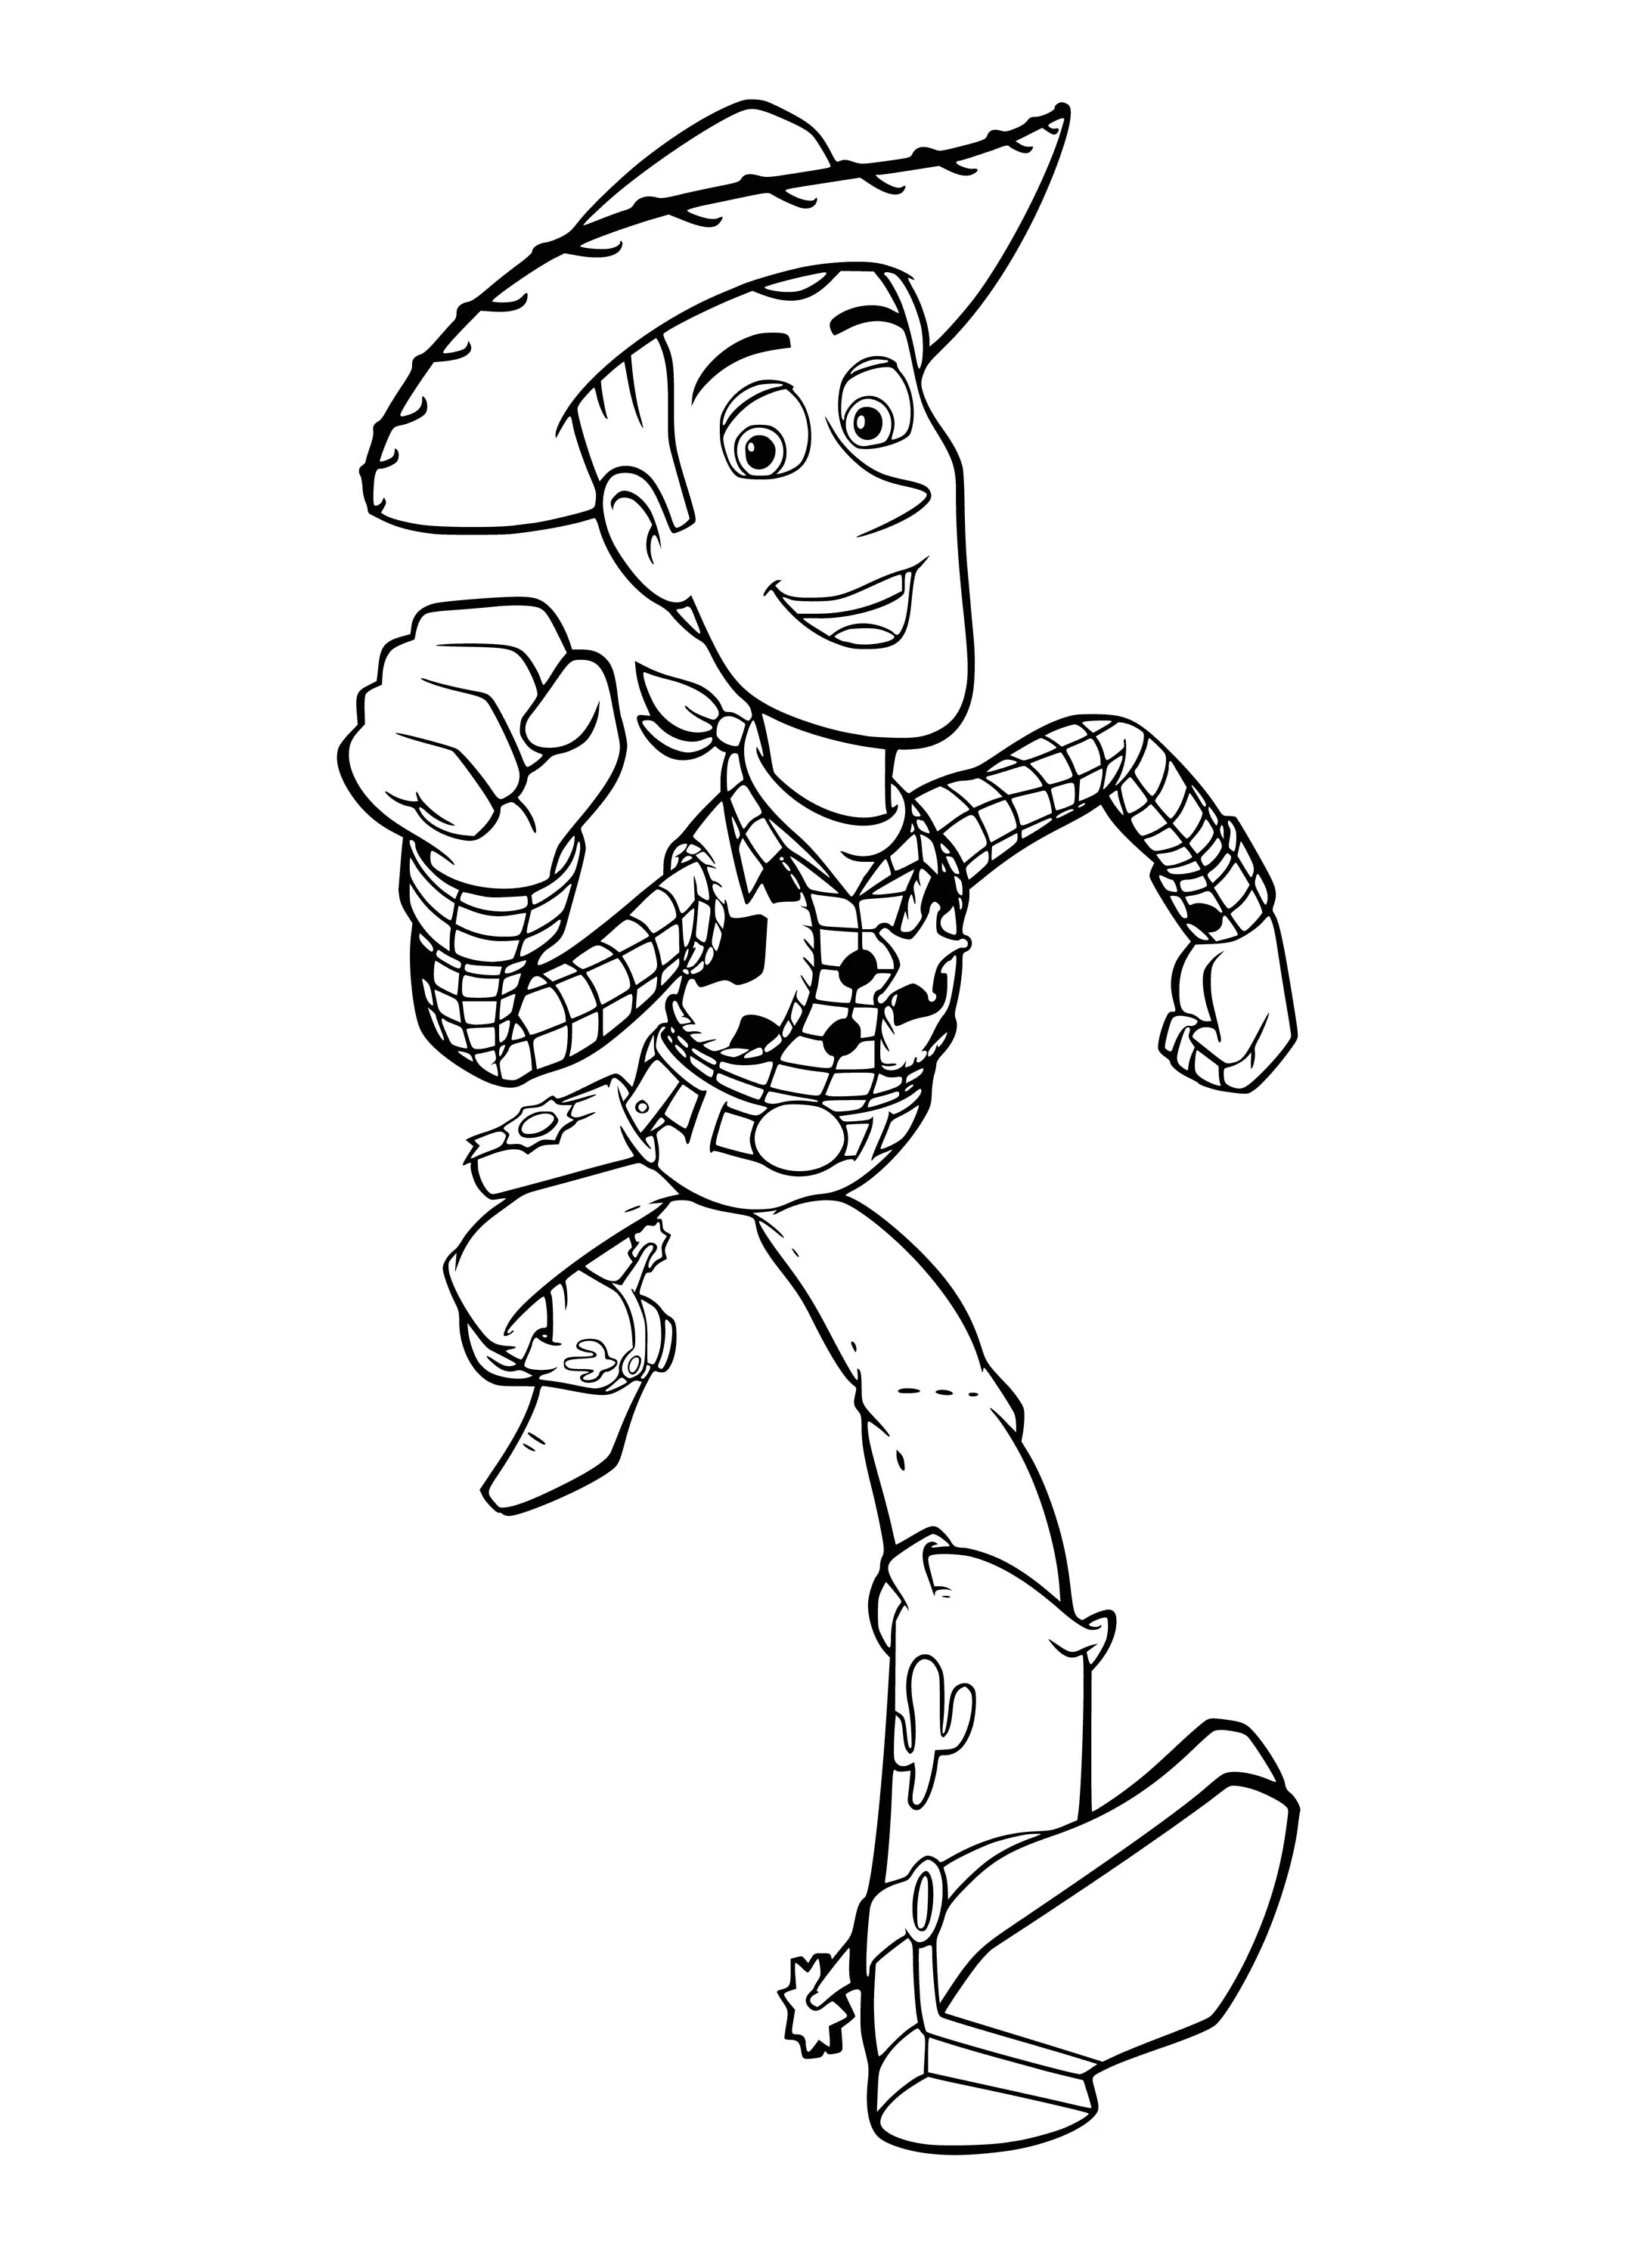 Adventurous sheriff coloring page